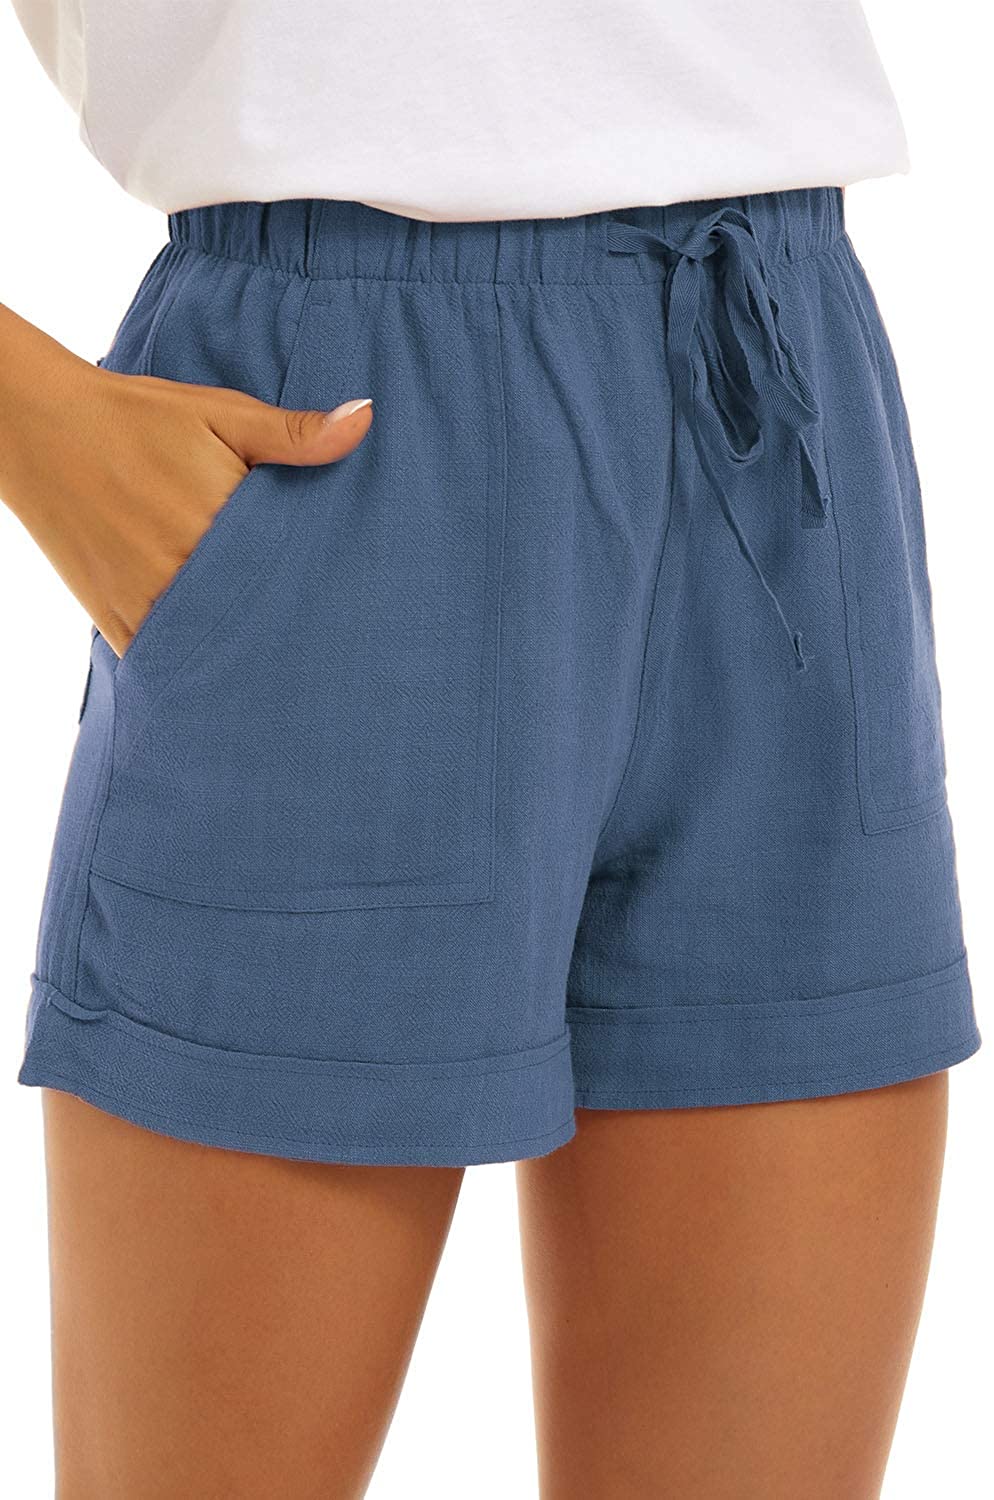 NEYOUQE Womens Cotton Linen Casual Summer Elastic Waist Comfy Shorts with Pocket 